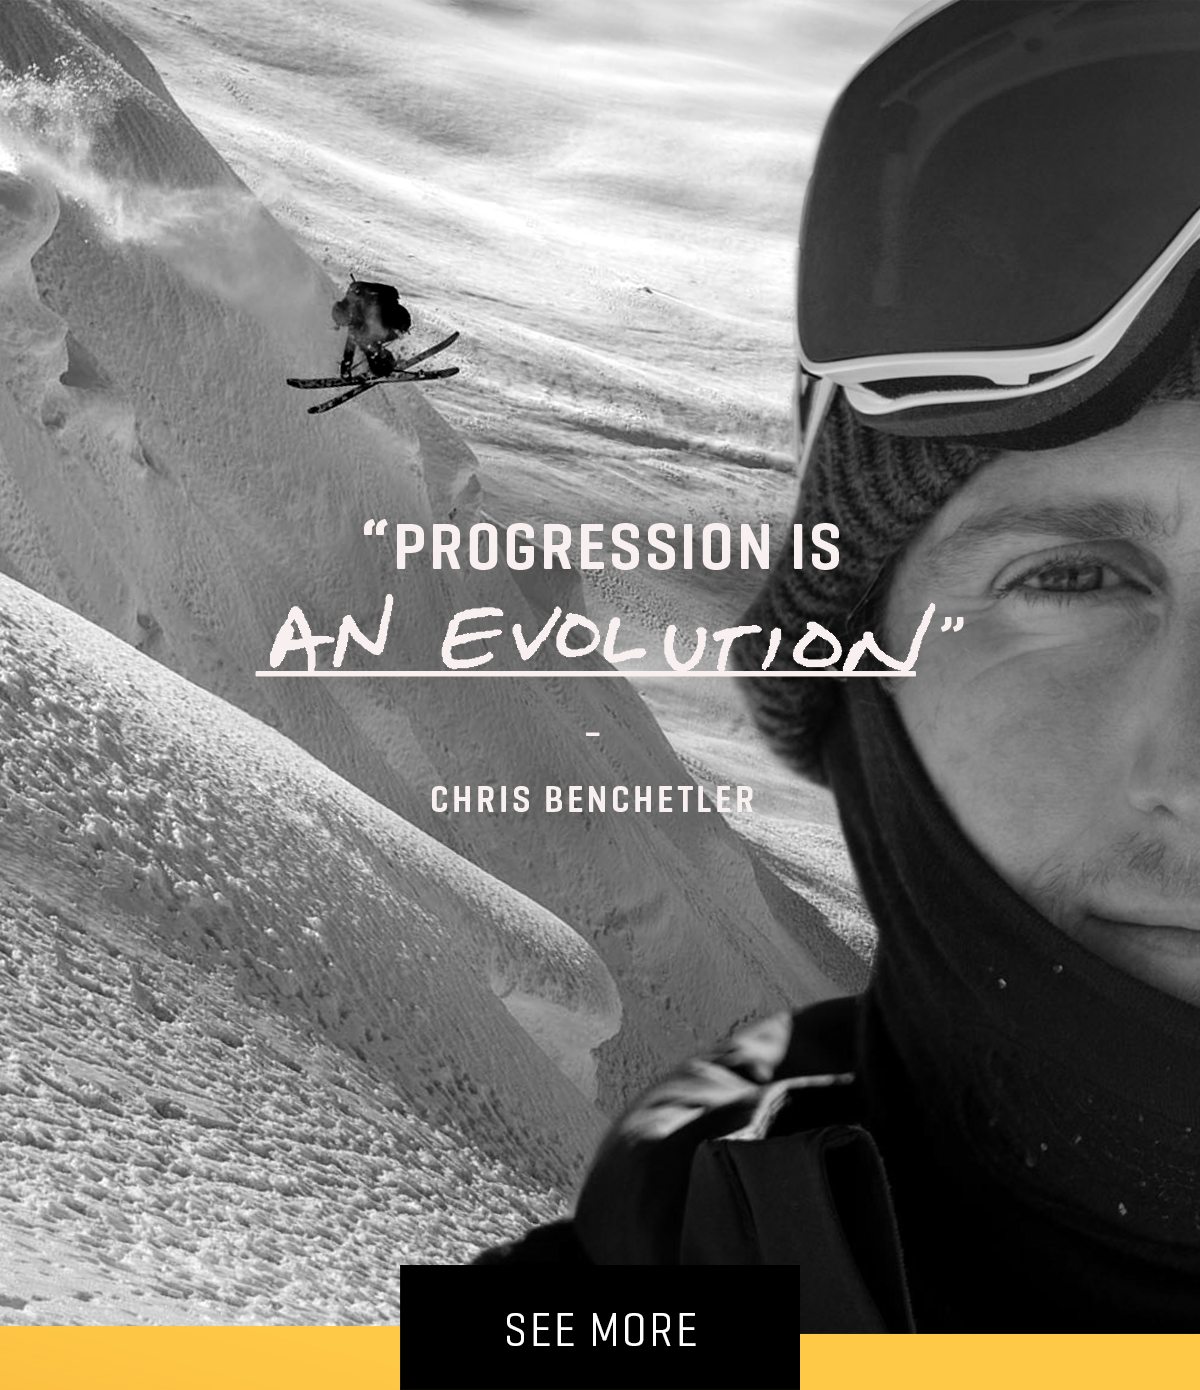 See What Progression Means to Chris Benchetler